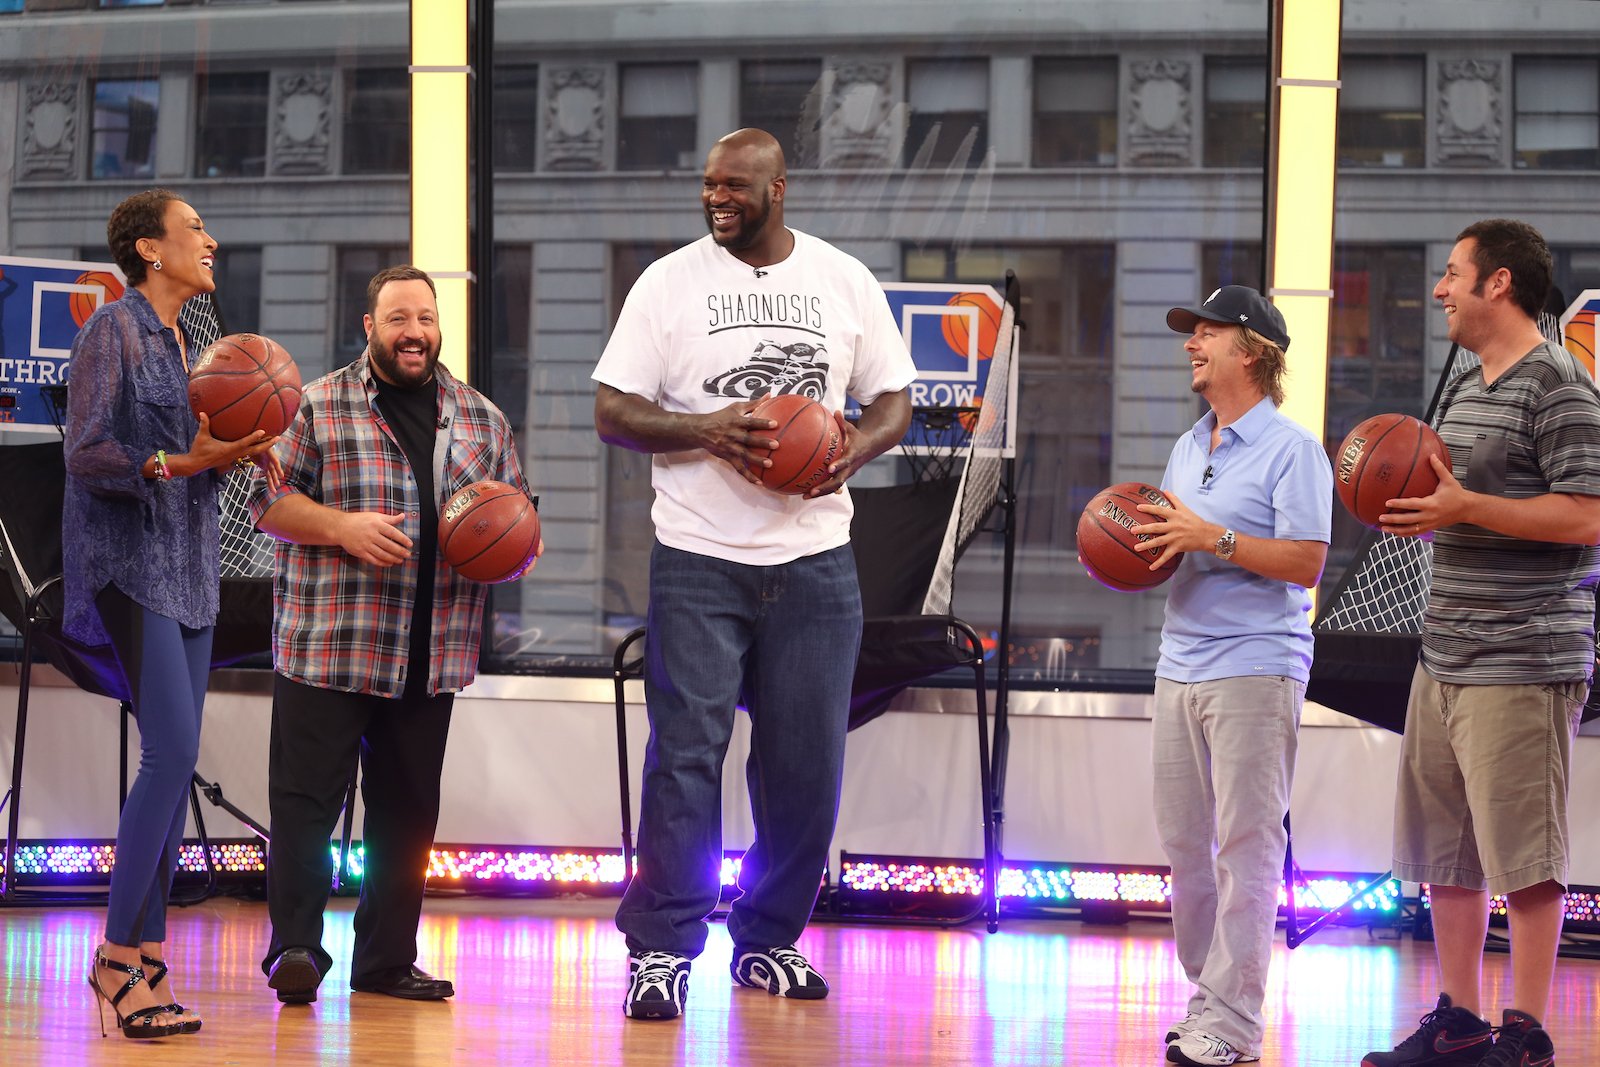 Adam Sandler Shaq shower story went viral after the stars from Grown Ups 2 Adam Sandler, David Spade, Kevin James and Shaquille O'Neal played basketball on the set 